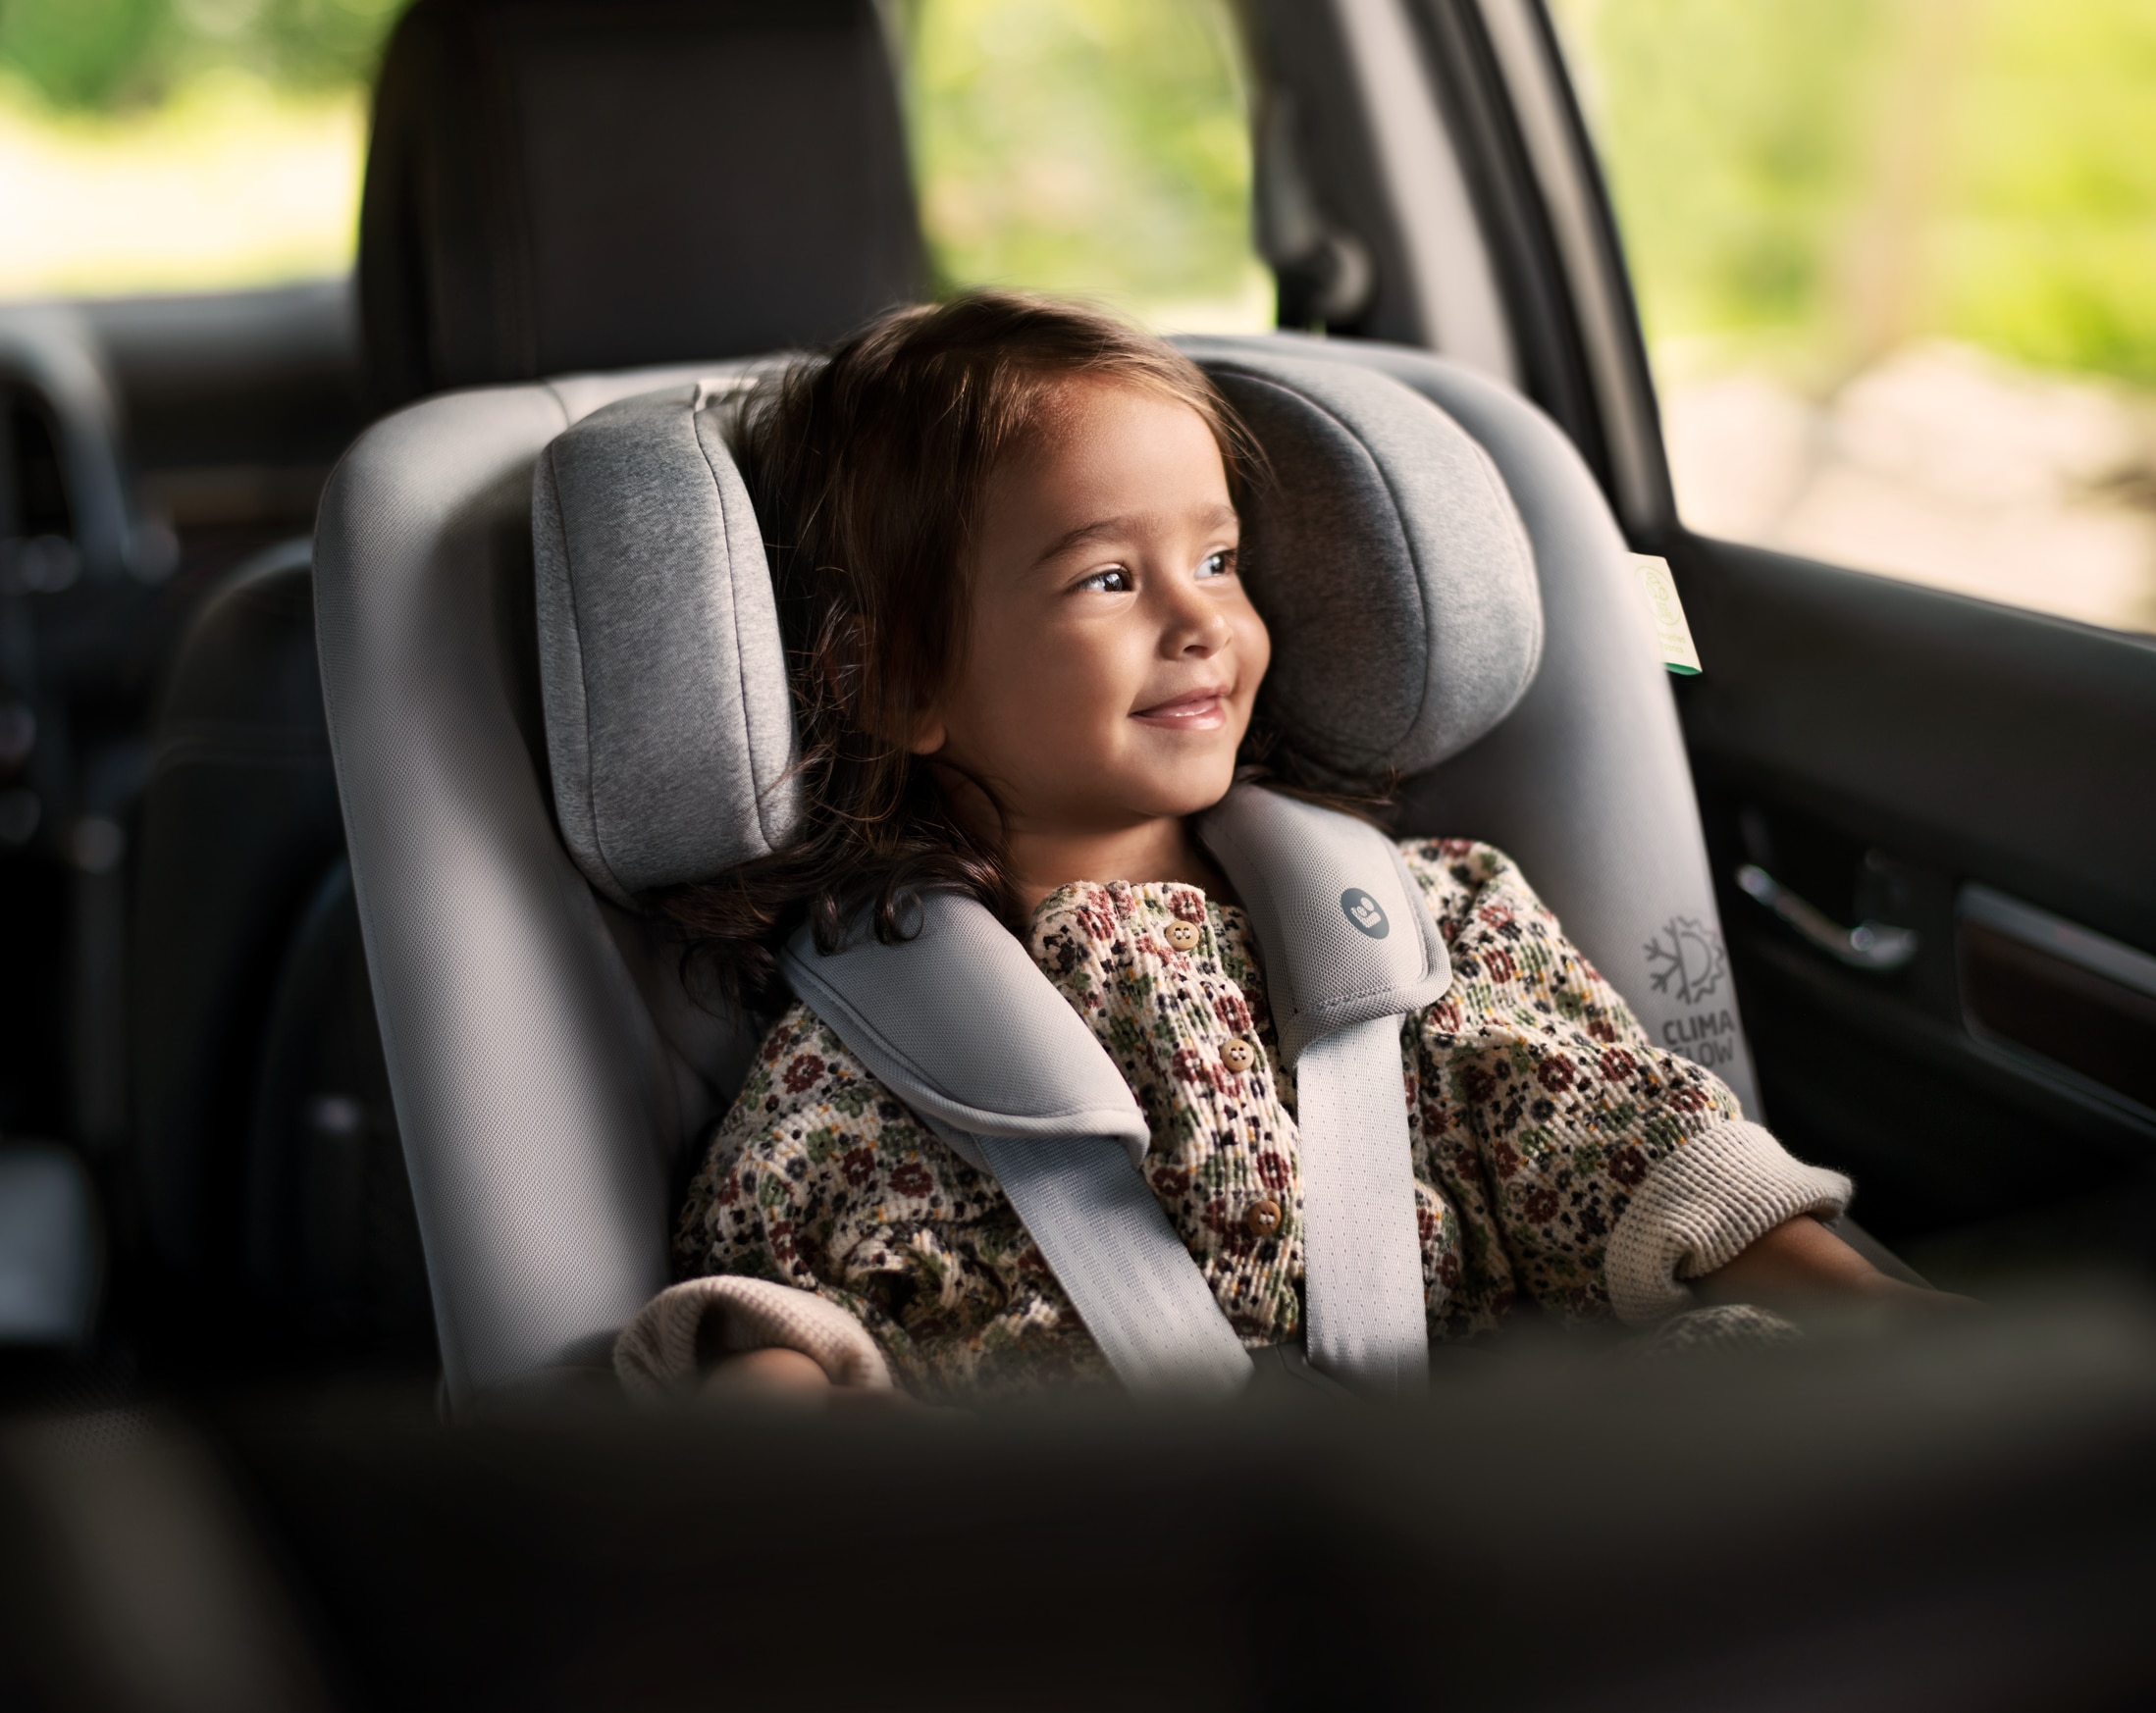 https://images.maxi-cosi.com/m/6338103be8bbd9ee/PNG_72_DPI-MC8515_2022_maxicosi_car-seat_Mica-Pro-Eco_Lifestyle_Car_CloseupgirlinRWFpositioninthecar_keyvisual_Landscape_warm-filter.png